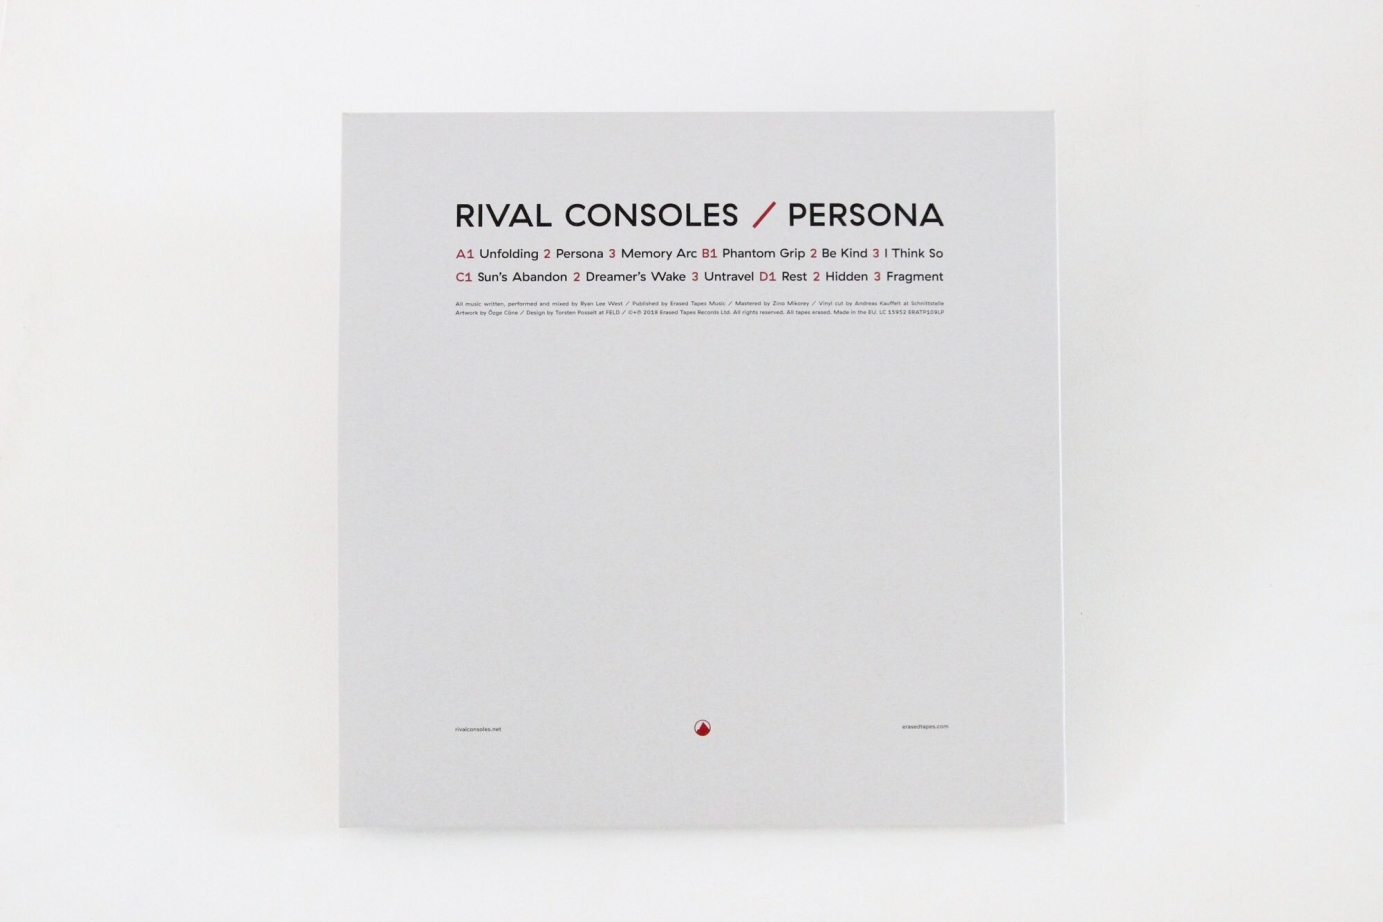 Artwork for Rival Consoles by Ozge Cone